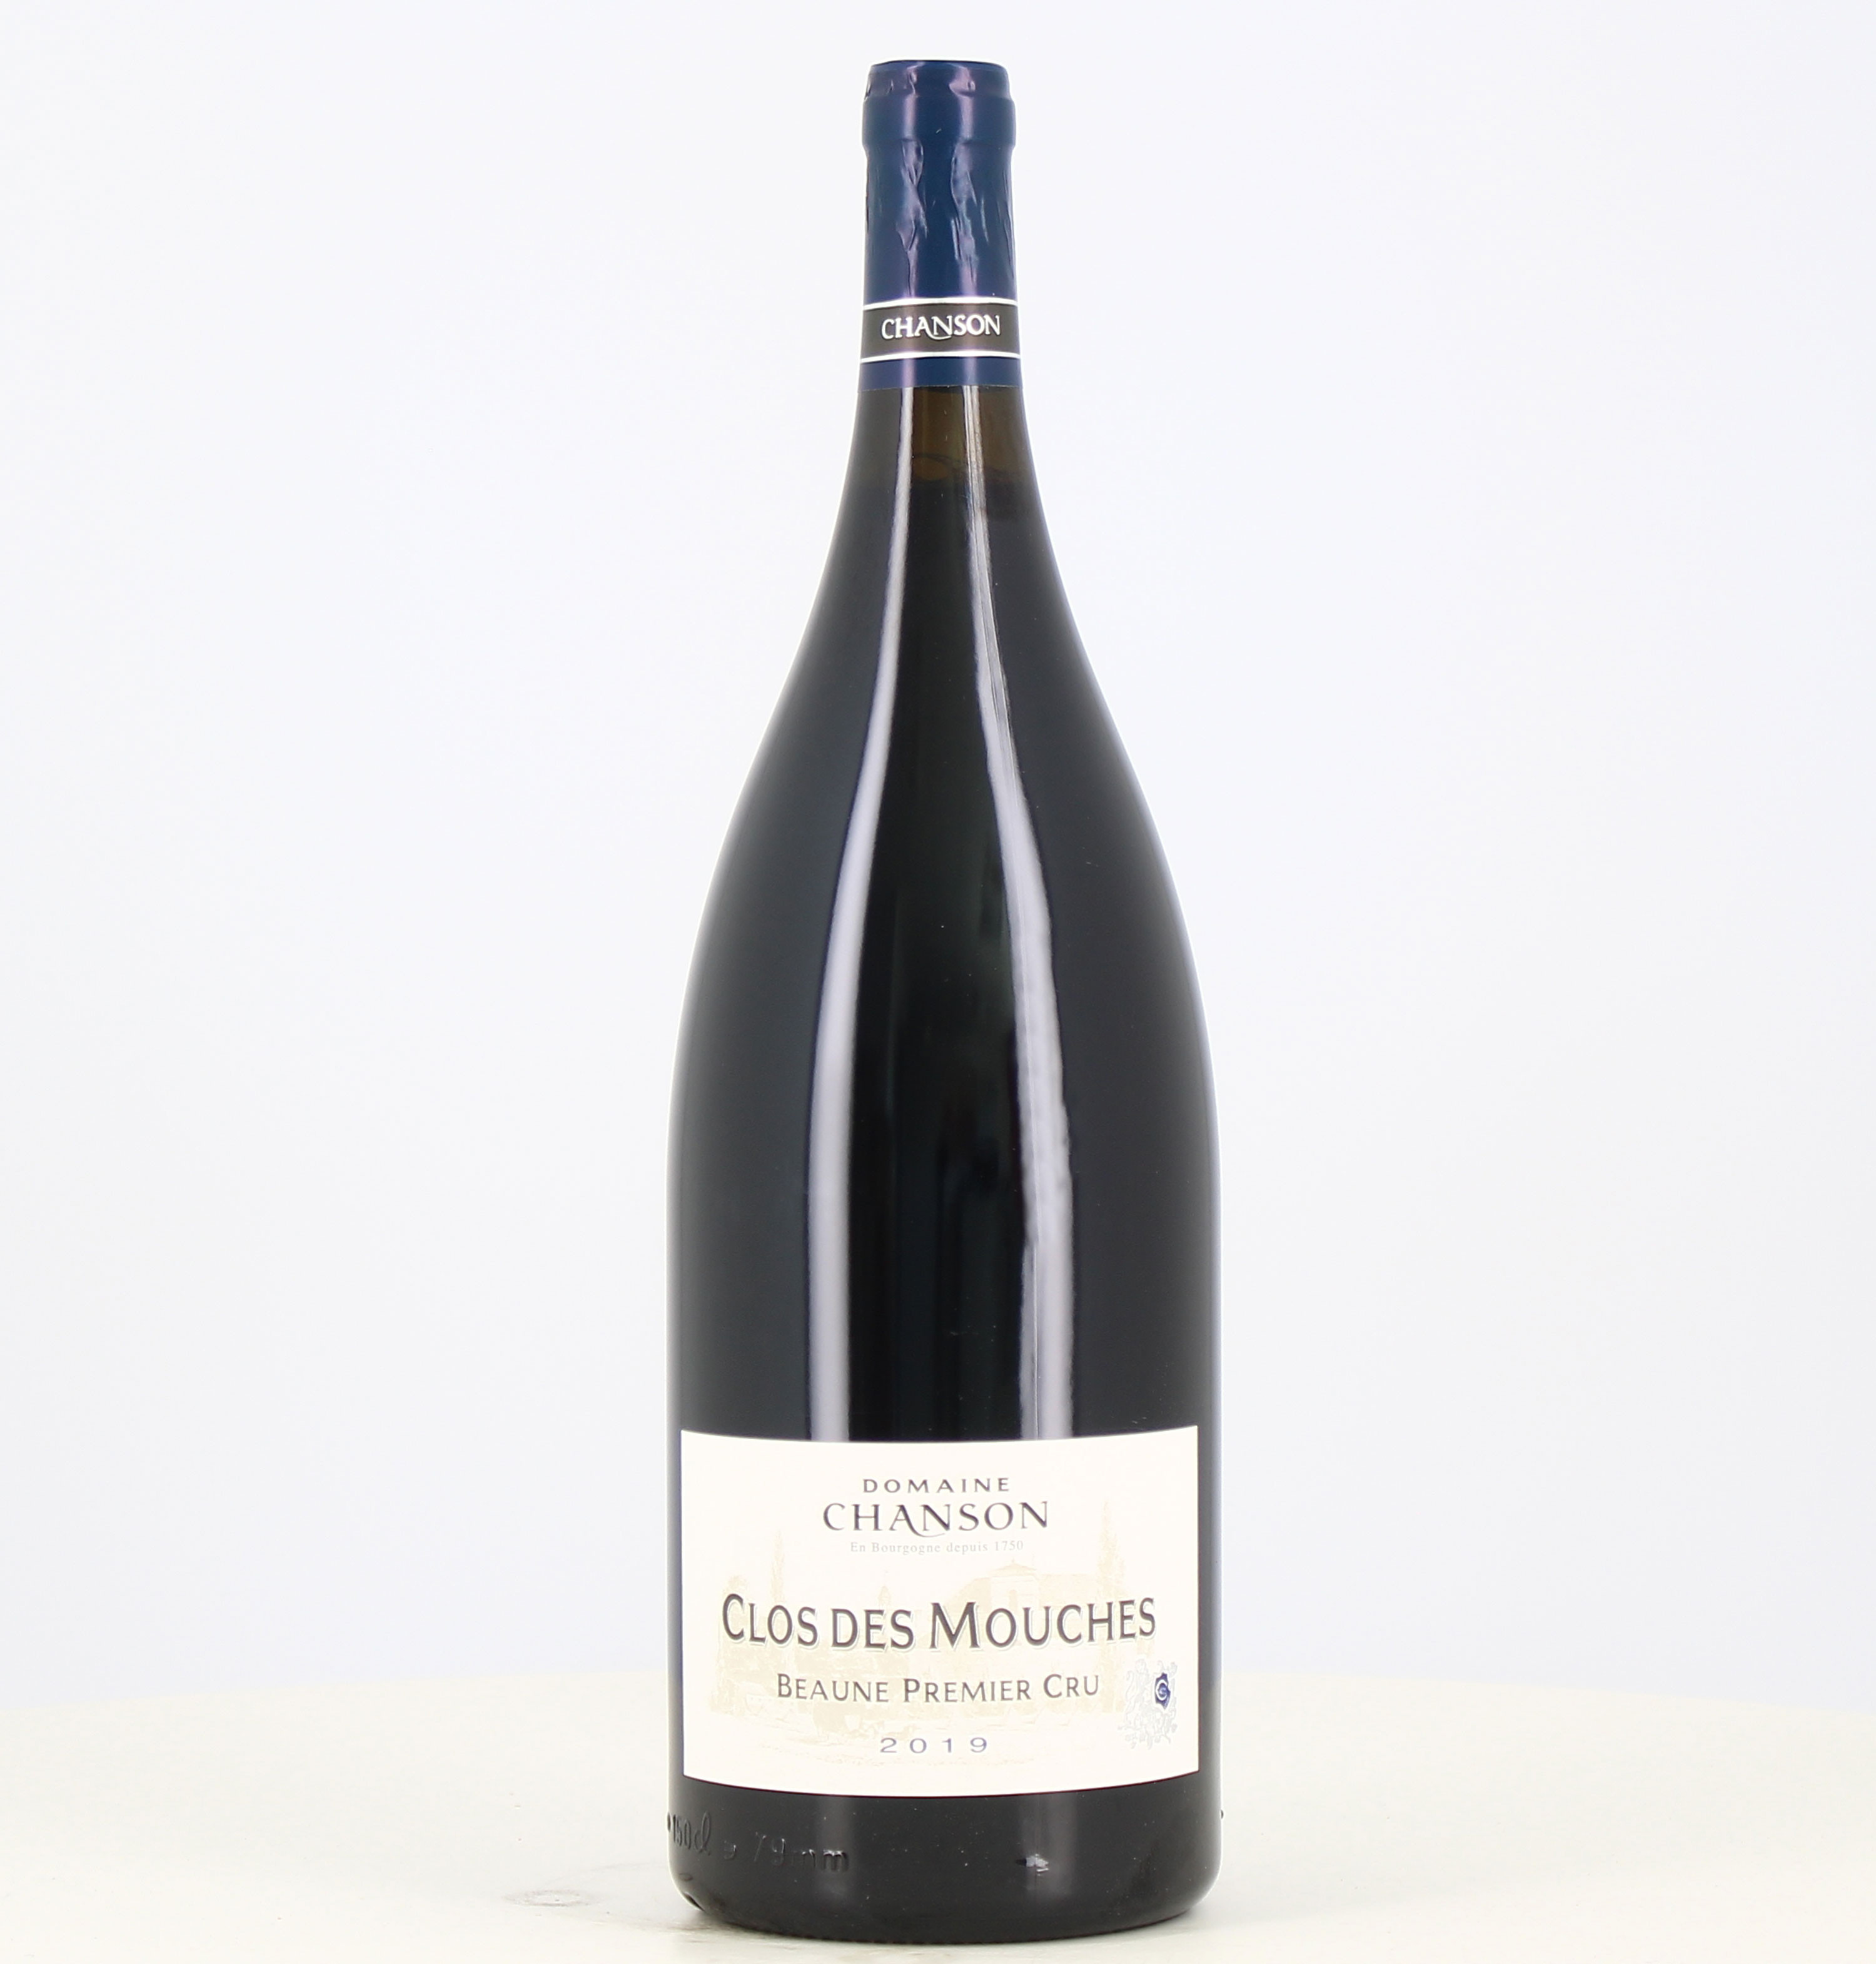 Magnum Rouge Beaune 1er cru Clos des Mouches 2019 Domaine Chanson 

Translated to Spanish:

Magnum Rouge Beaune 1er cru Clos des 